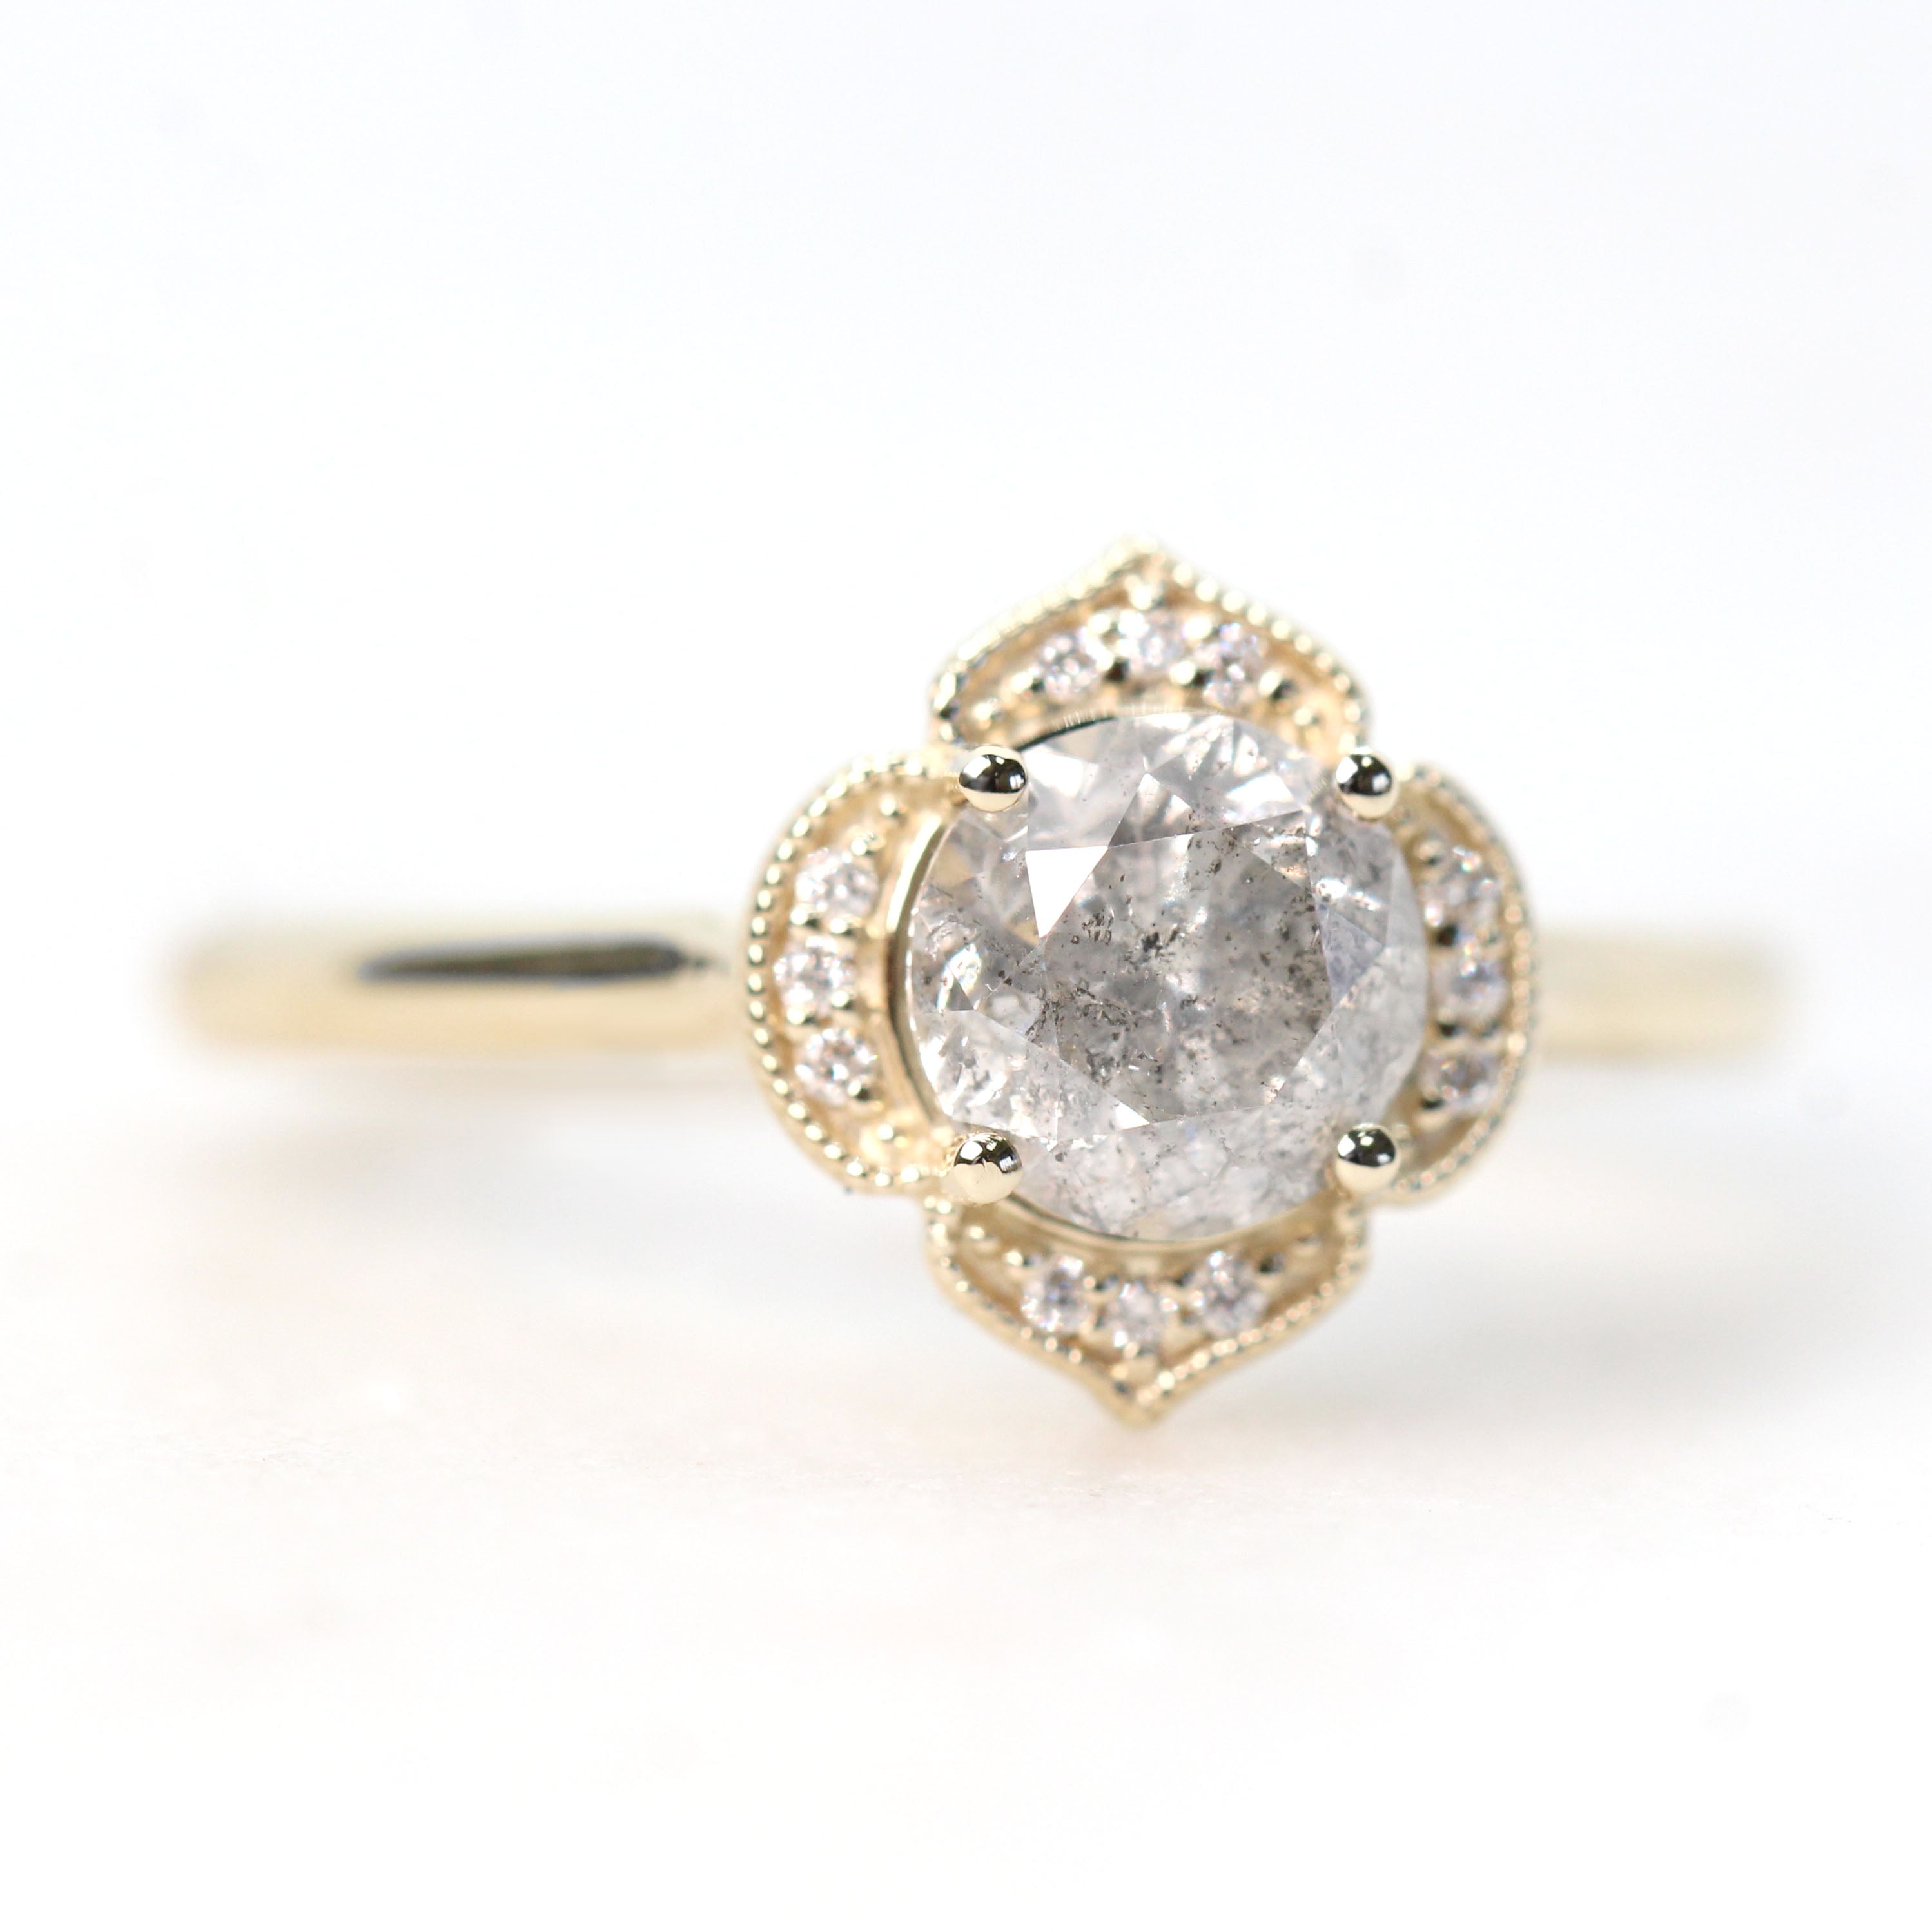 Clementine Ring with a 1.05 Carat Round Light Gray Celestial Diamond and White Accent Diamonds in 14k Yellow Gold - Ready to Size and Ship - Midwinter Co. Alternative Bridal Rings and Modern Fine Jewelry